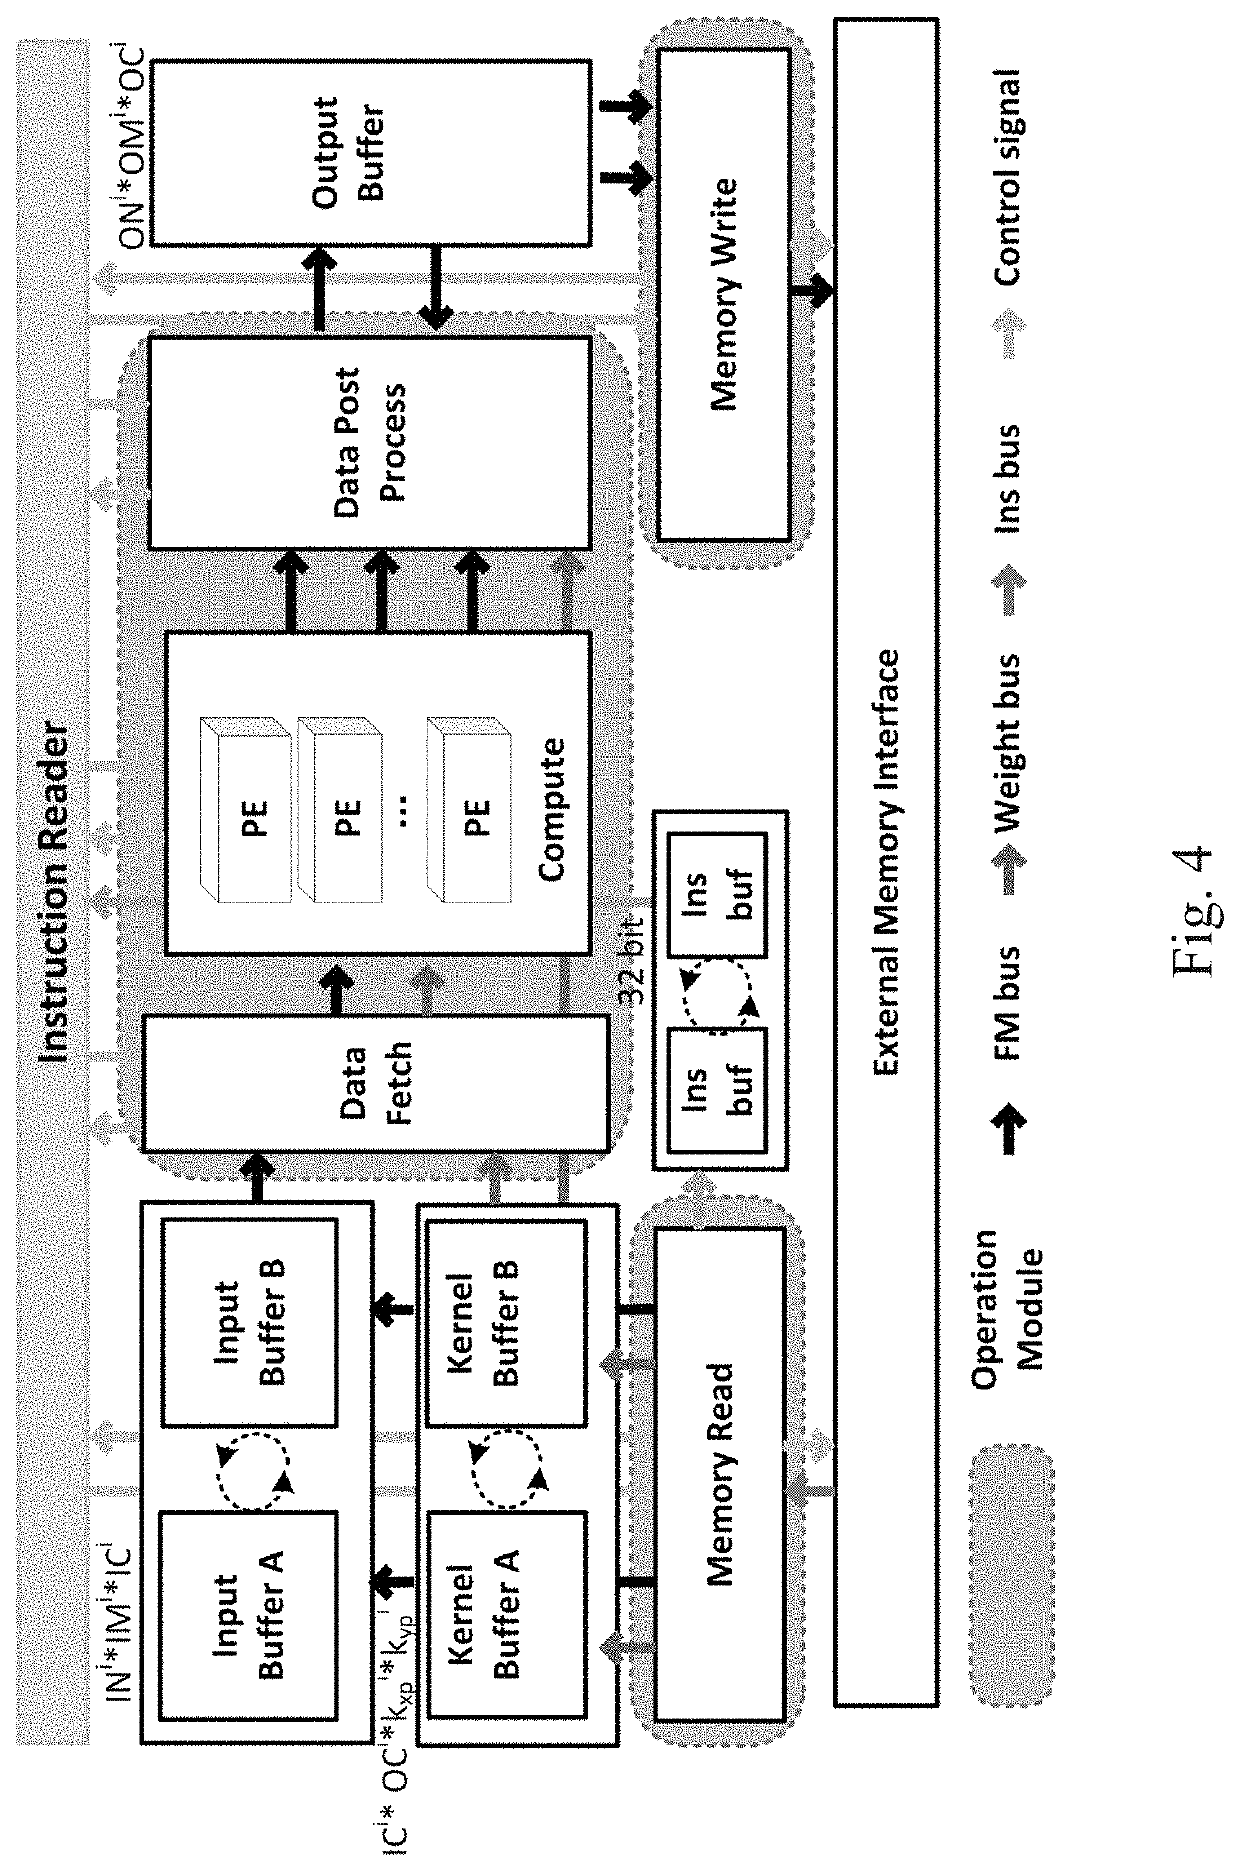 OPU-based CNN acceleration method and system